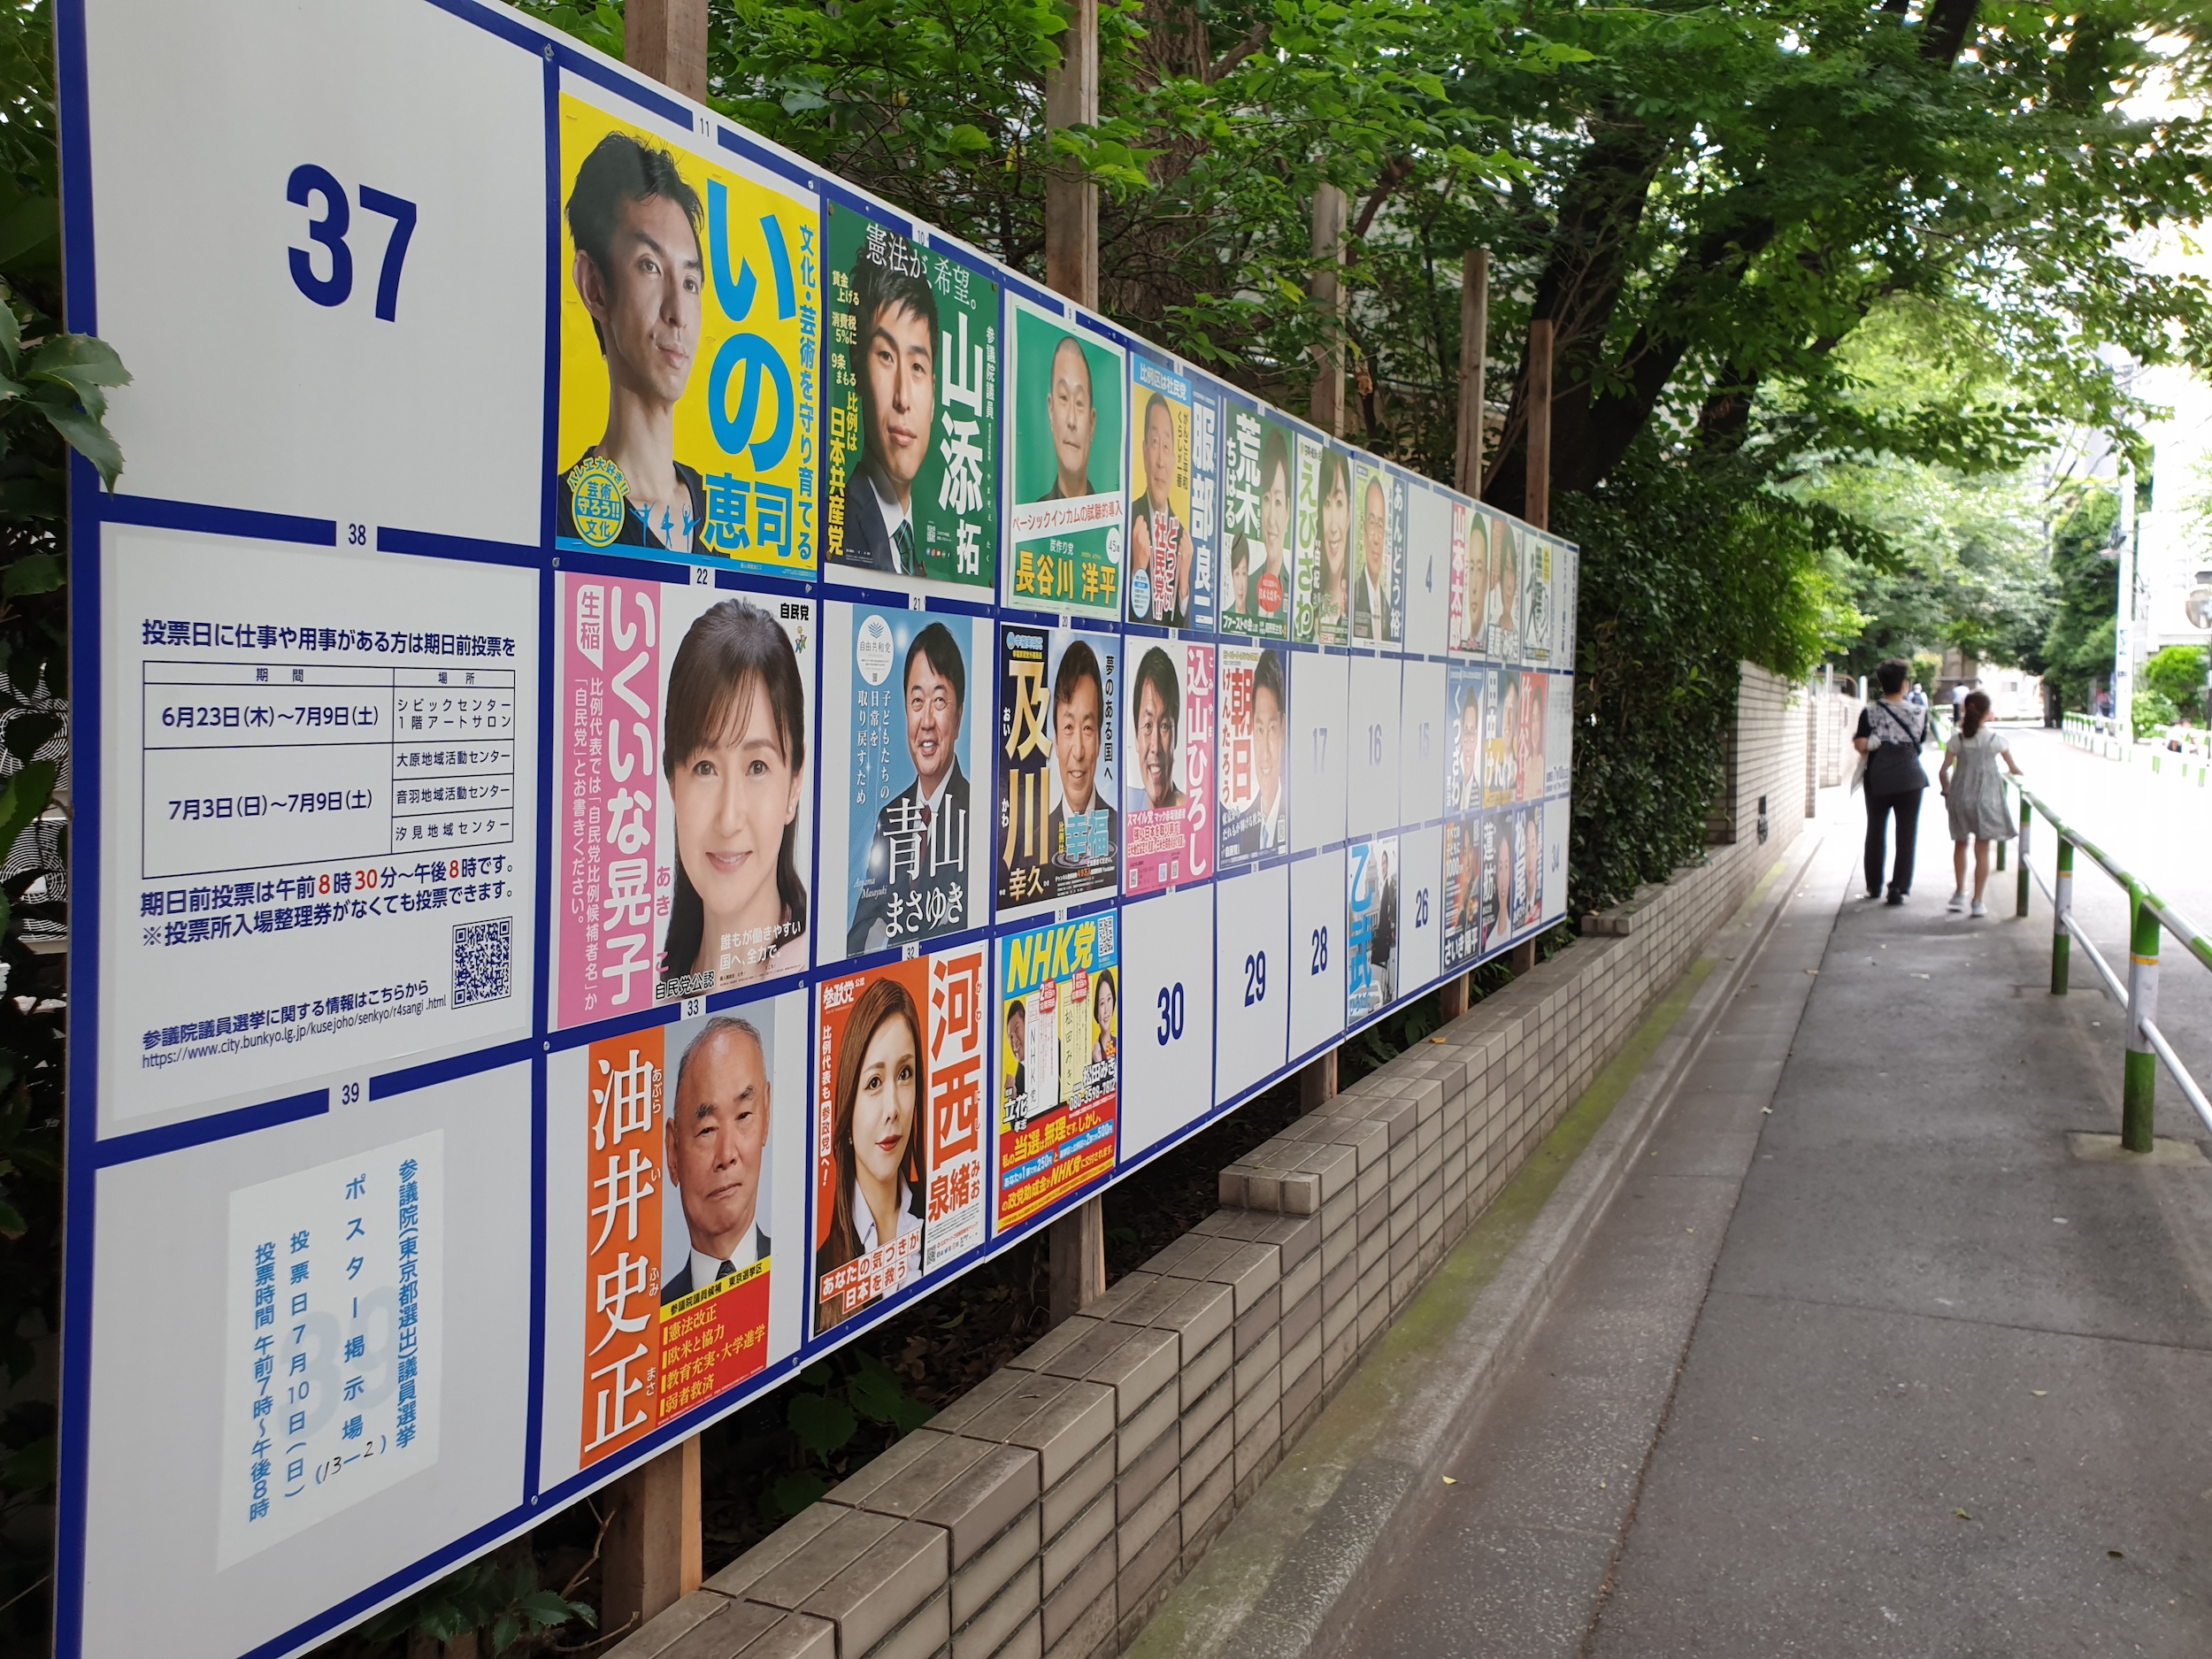 Japanese election posters on noticeboard